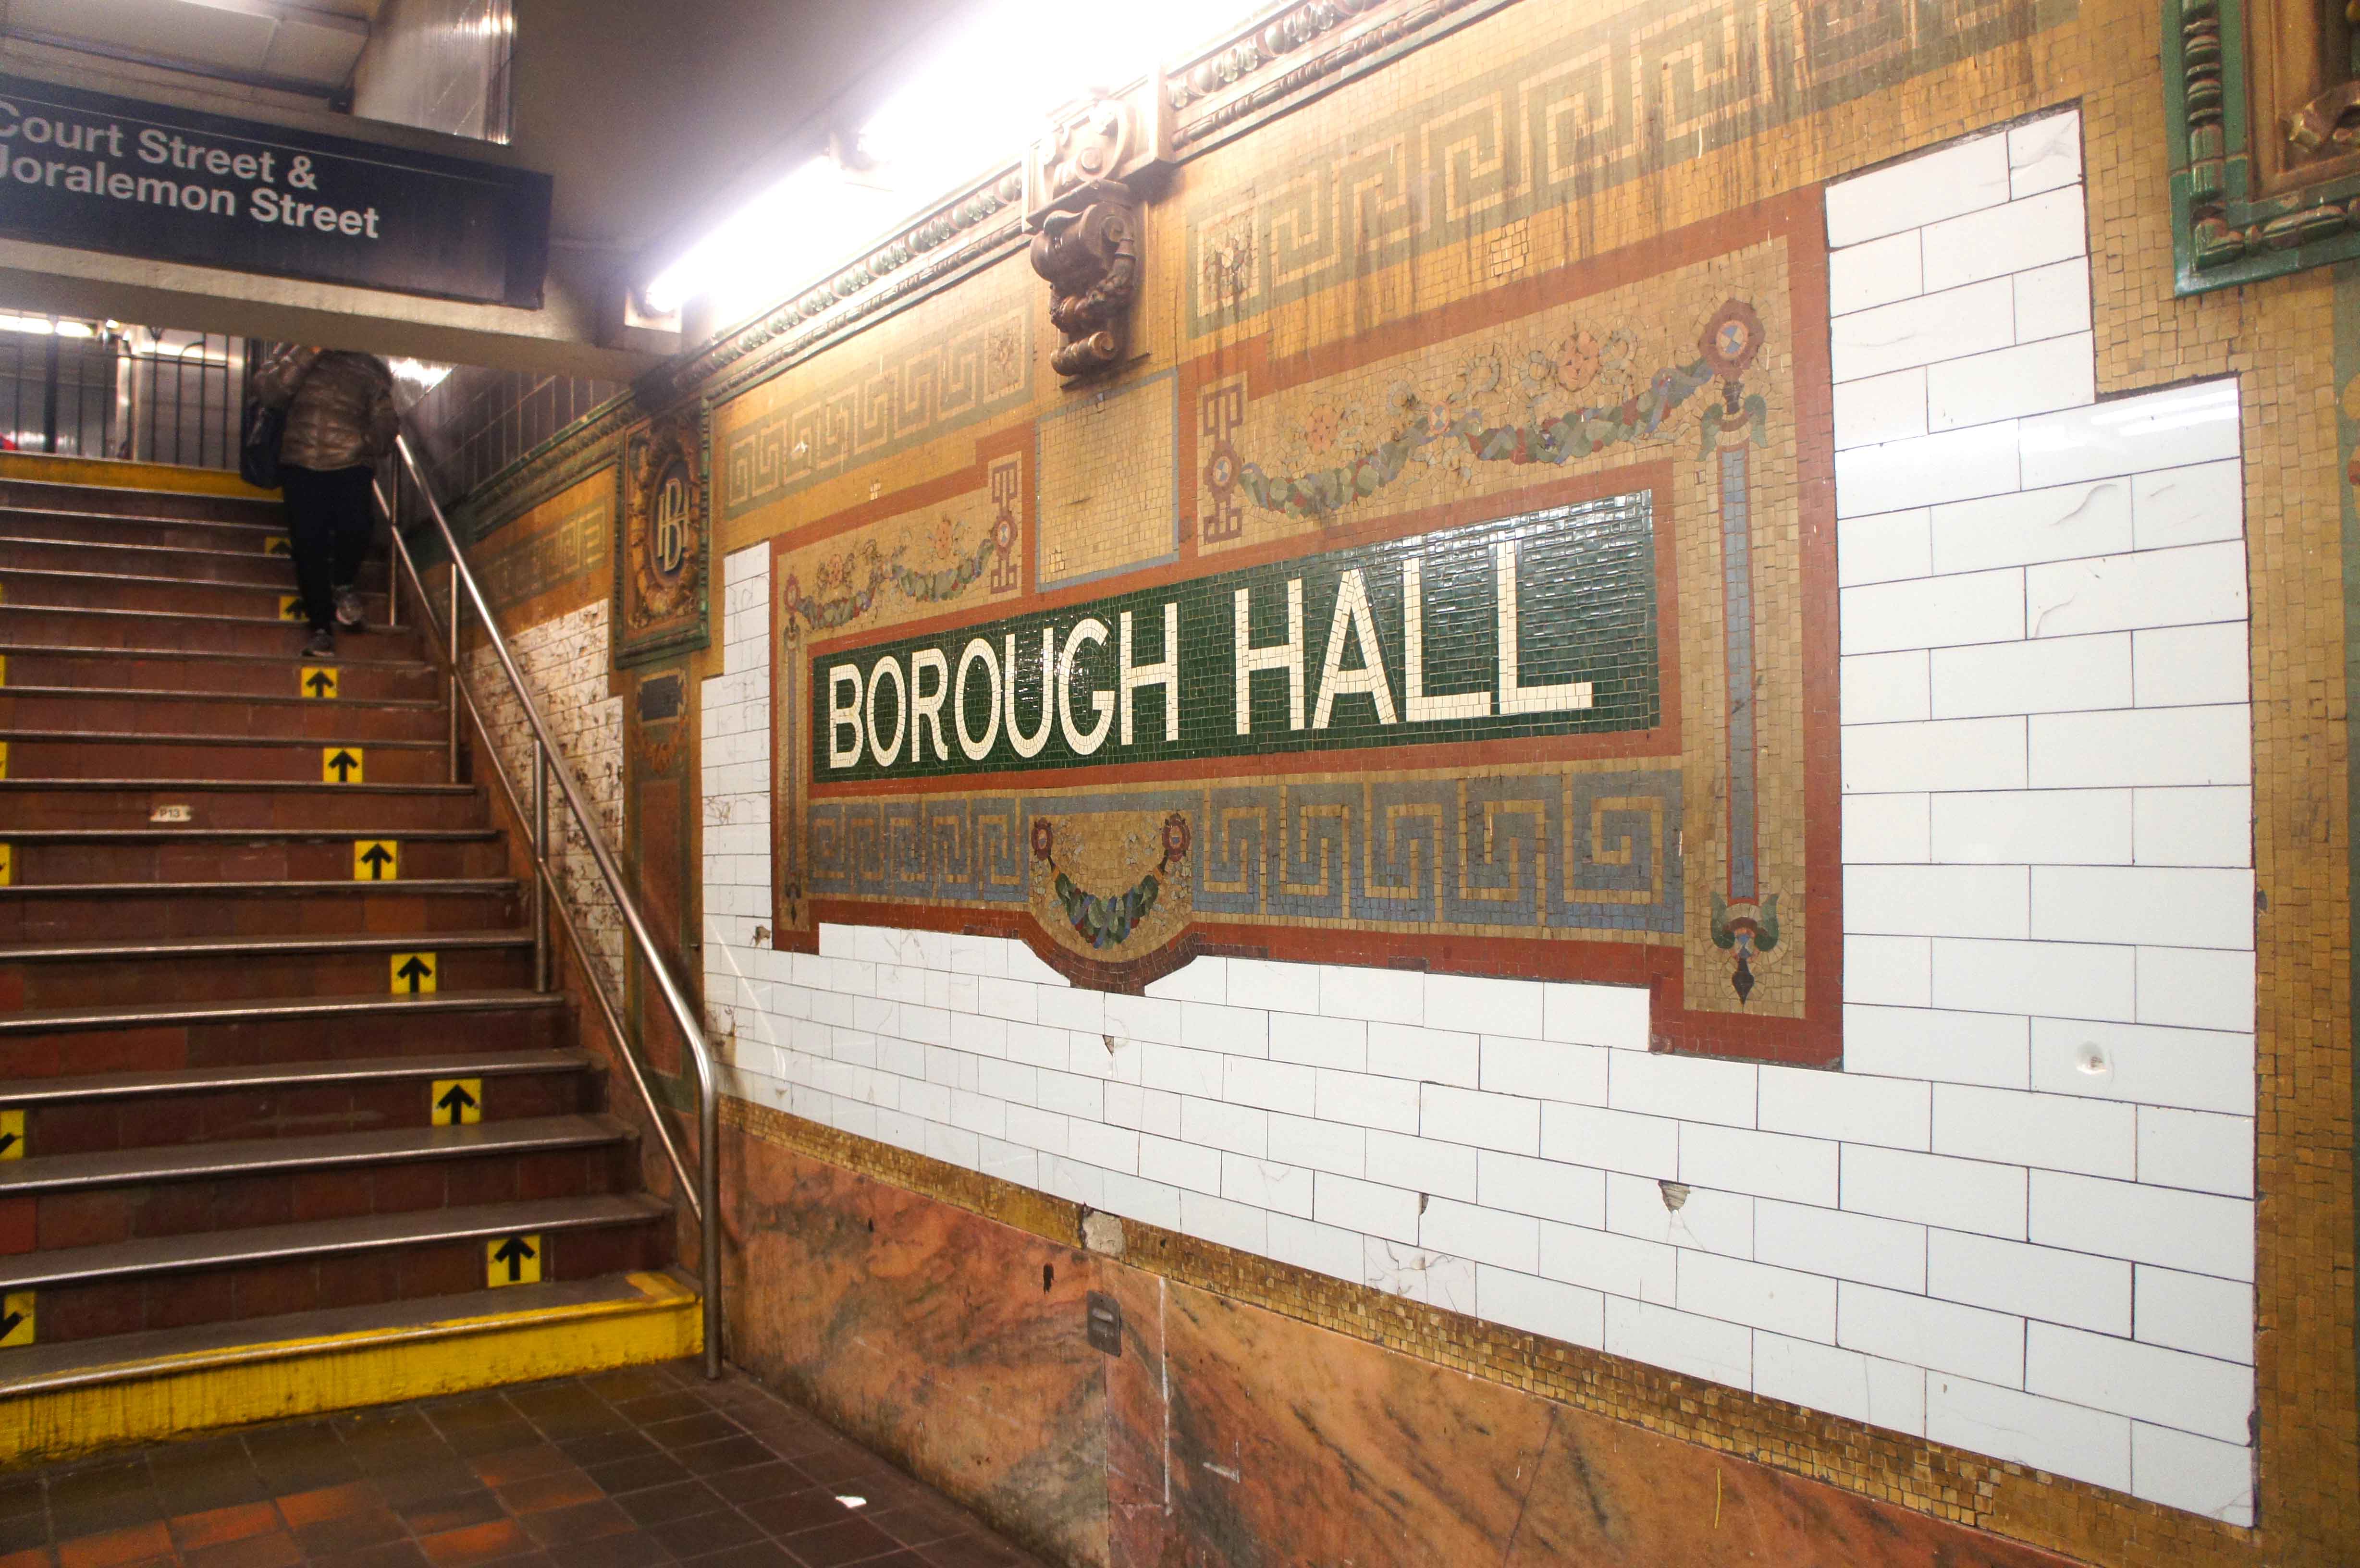 2 Pierrepont Street is conveniently located near a number of subway stations providing easy access into Manhattan, including Borough Hall Station, shown here